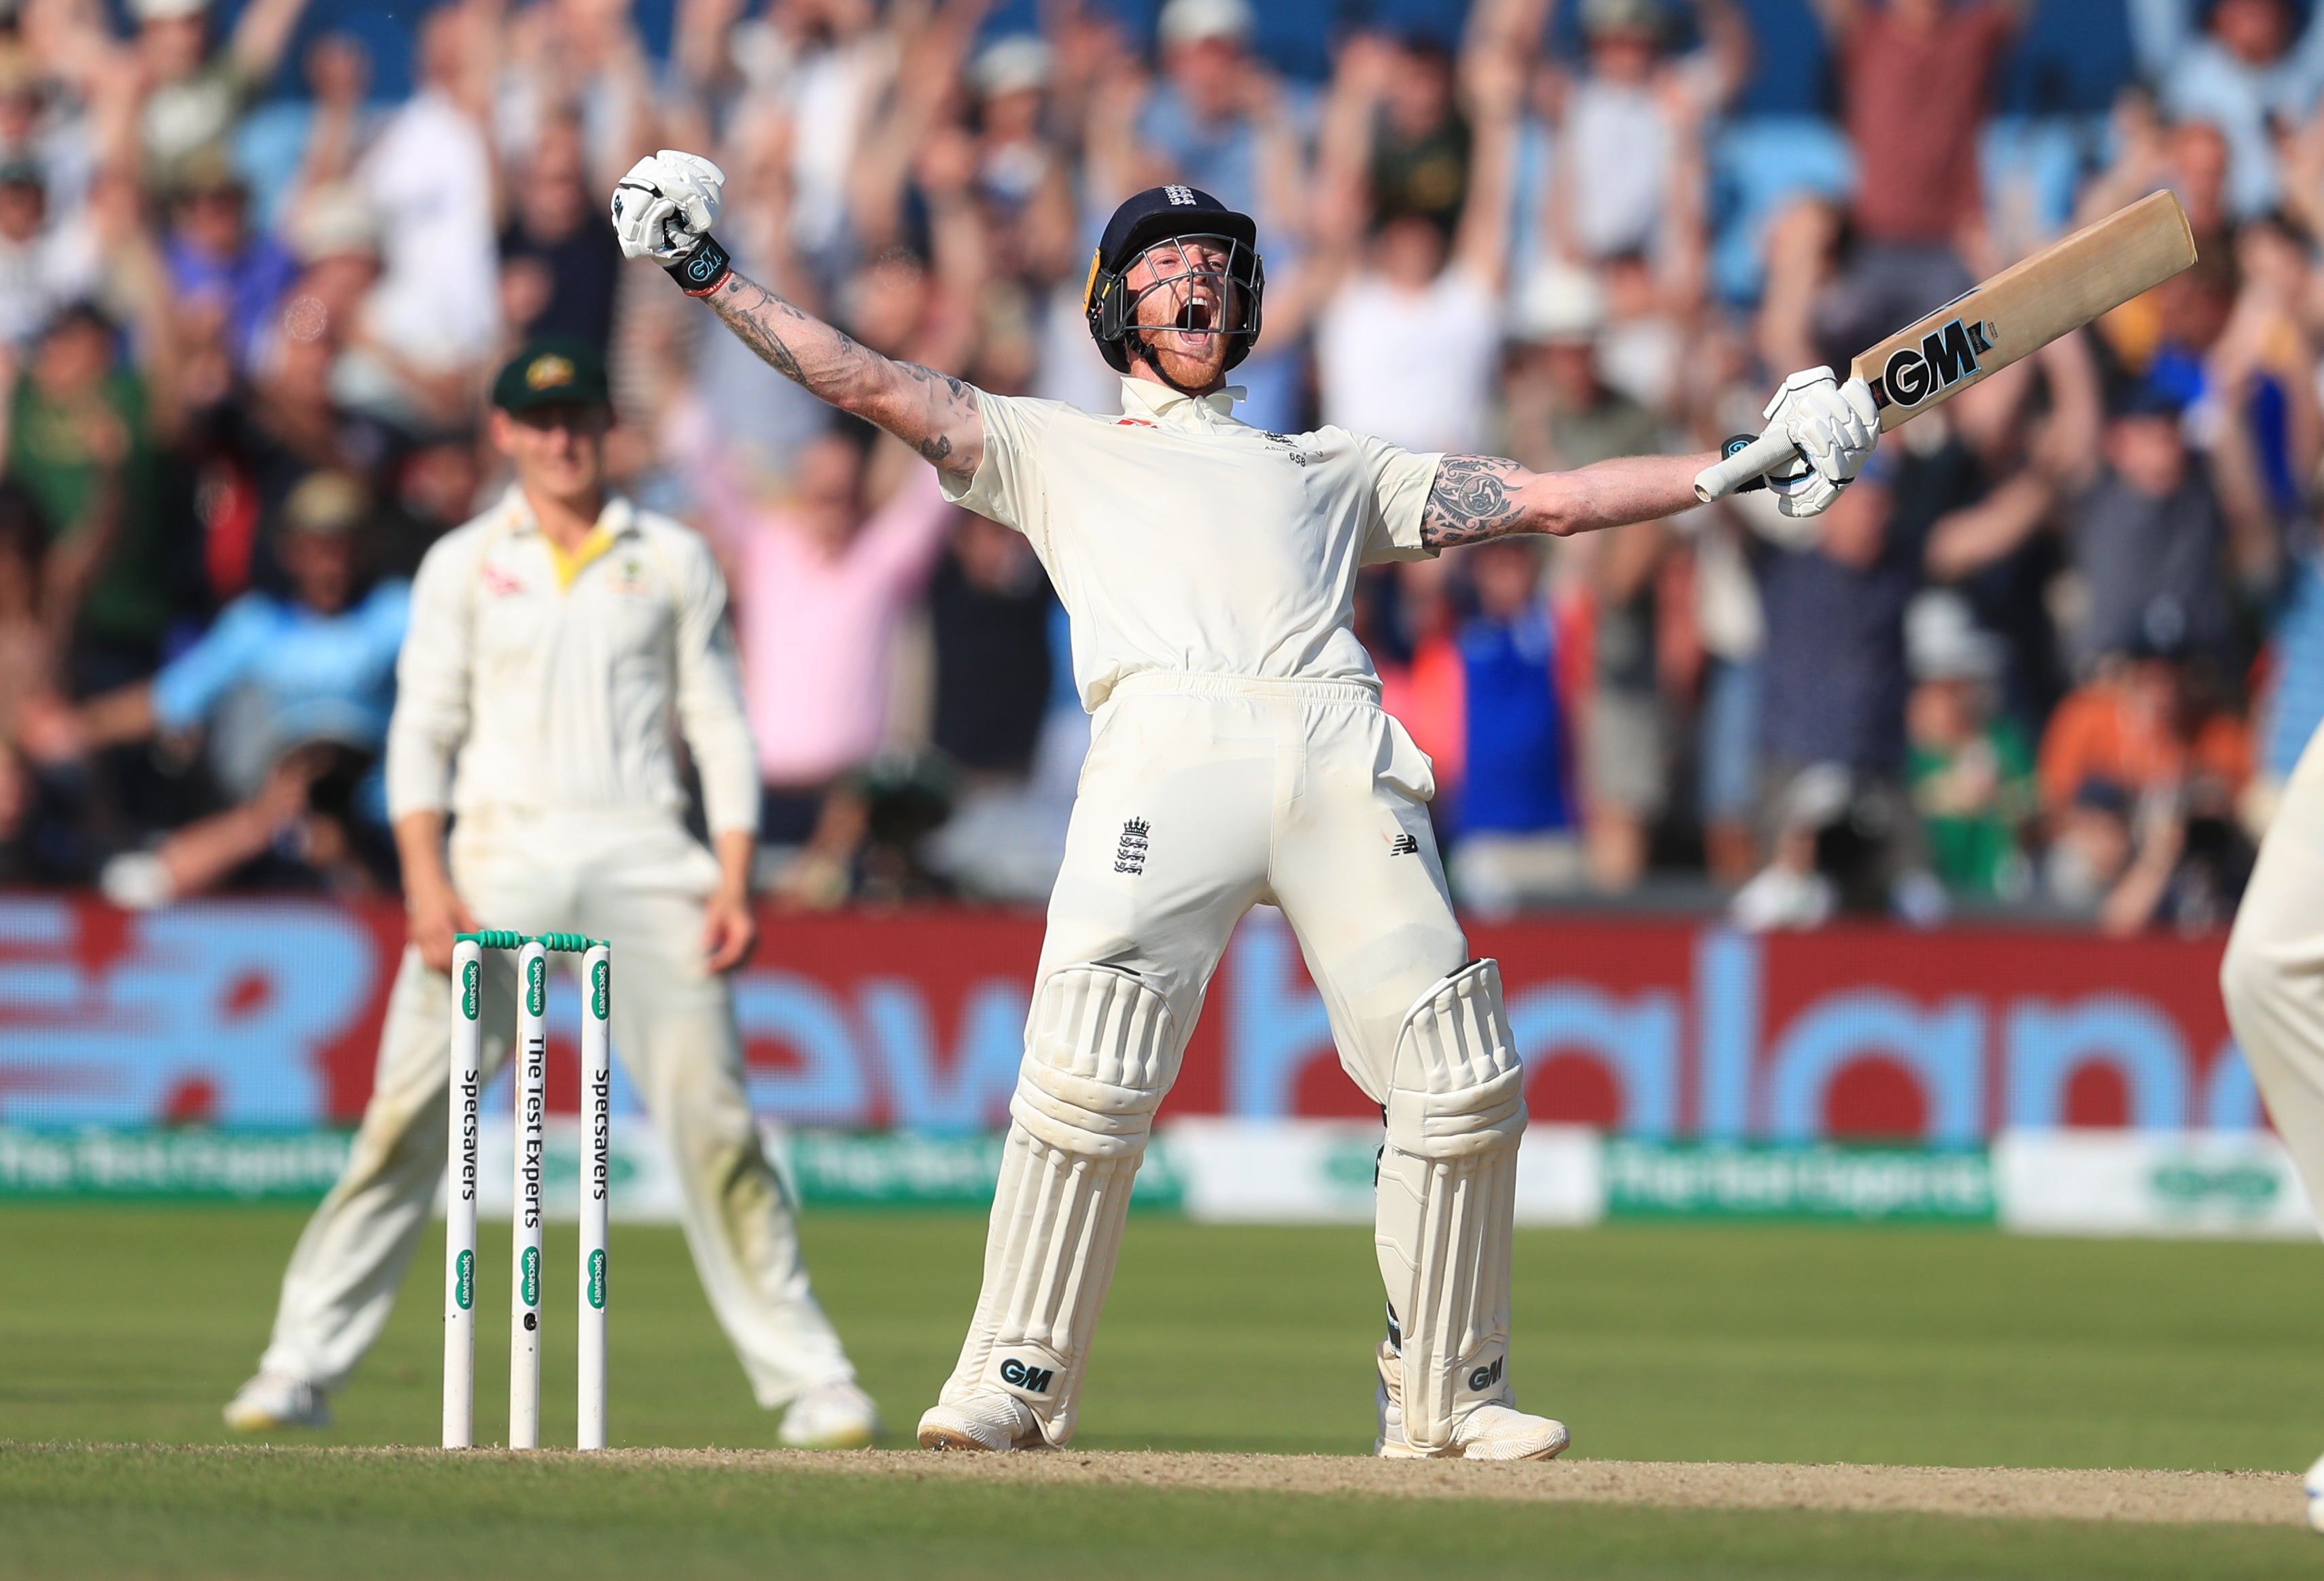 Ben Stokes’ unforgettable unbeaten century propelled England to an unlikely victory over Australia at Headingley in the 2019 Ashes (Mike Egerton/PA)